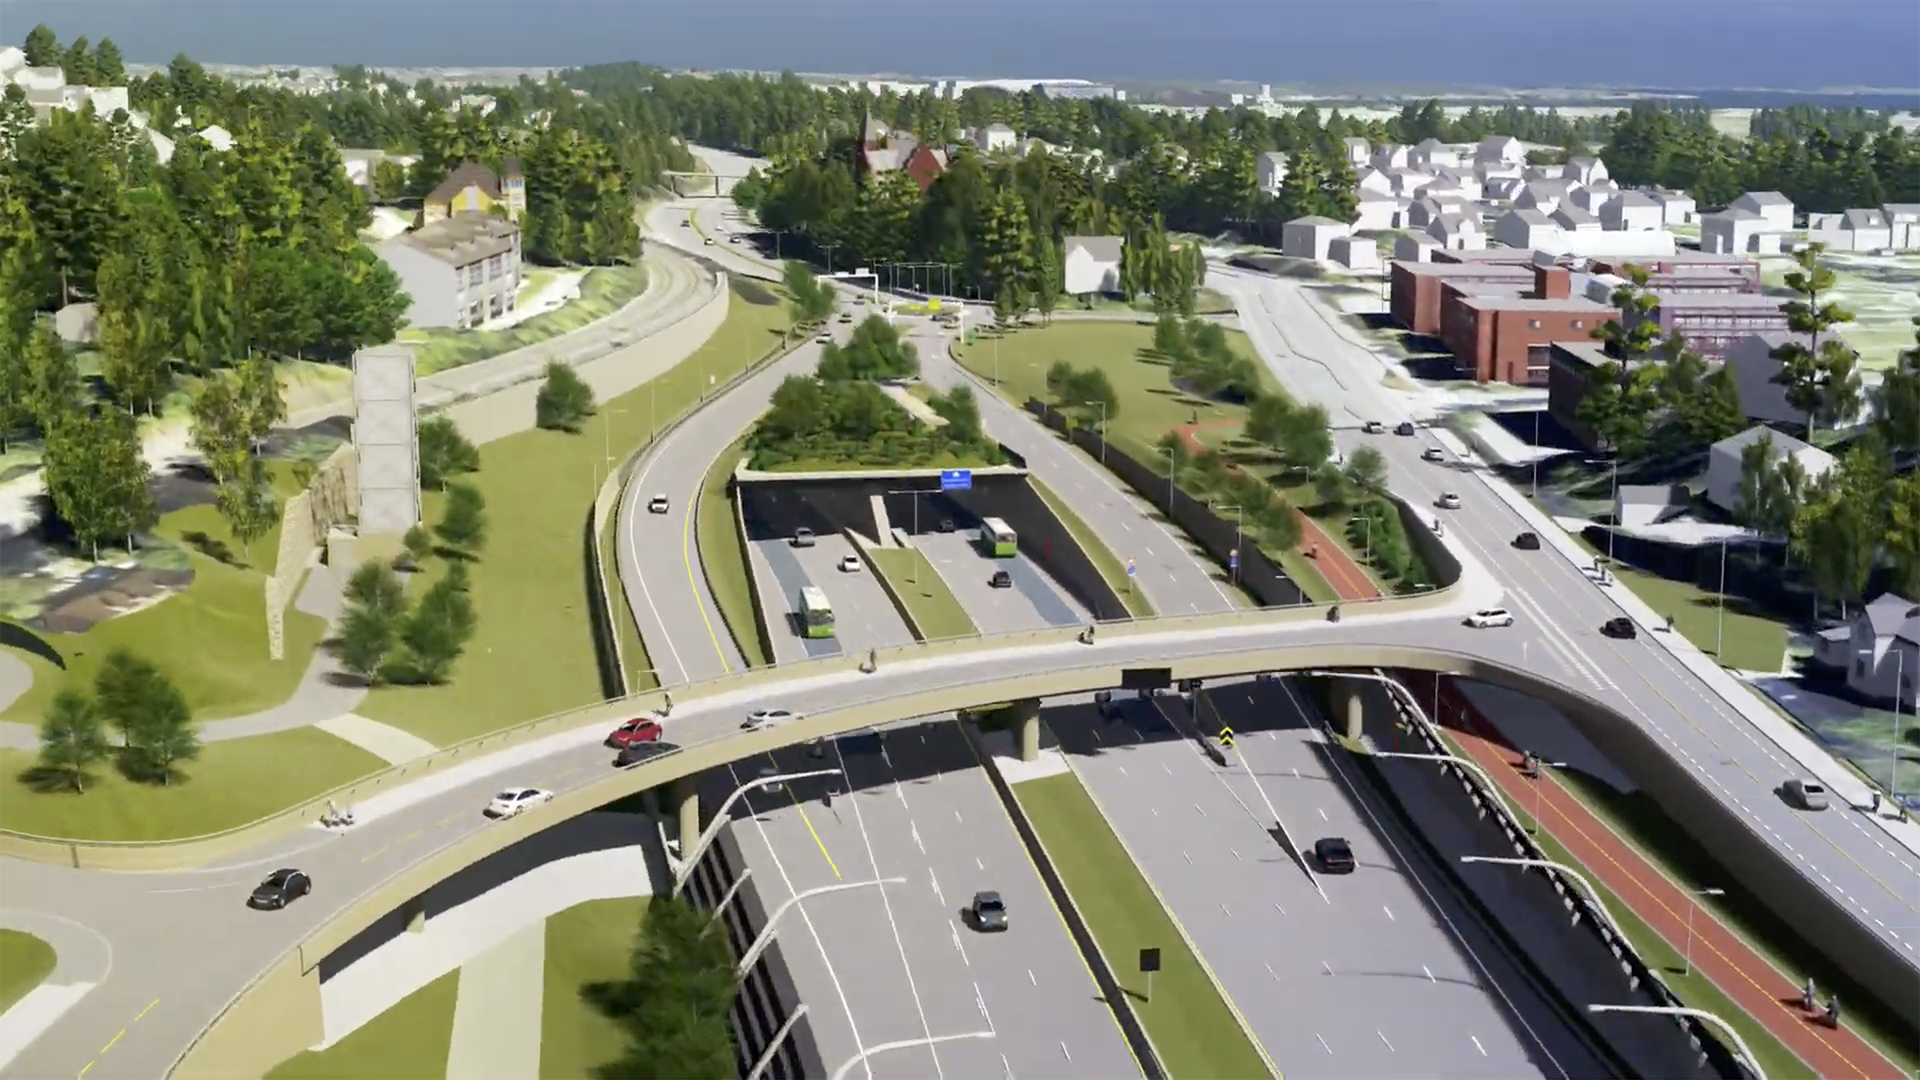 Close to Strand there will also be a lid over the E18 highway. A bike lane of high standard will also be part of the system. Photo: ViaNova Plan og Trafikk